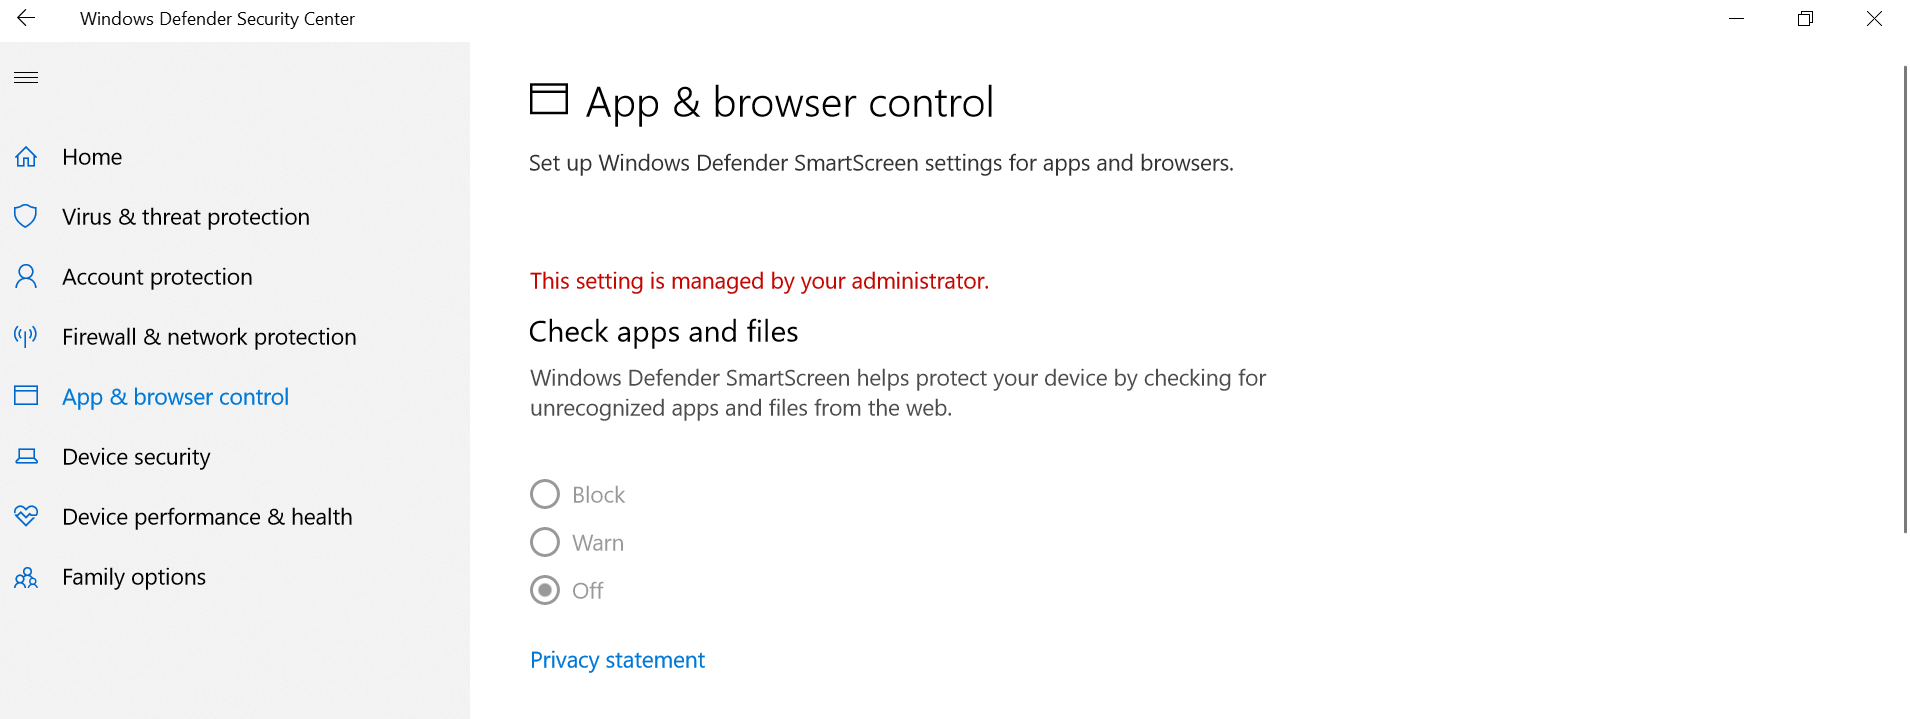 "This setting is managed by your administrator" - Apps & Browser Control under Windows... 3dfb3a29-484b-4d83-9c6c-15d14effb6b3?upload=true.png